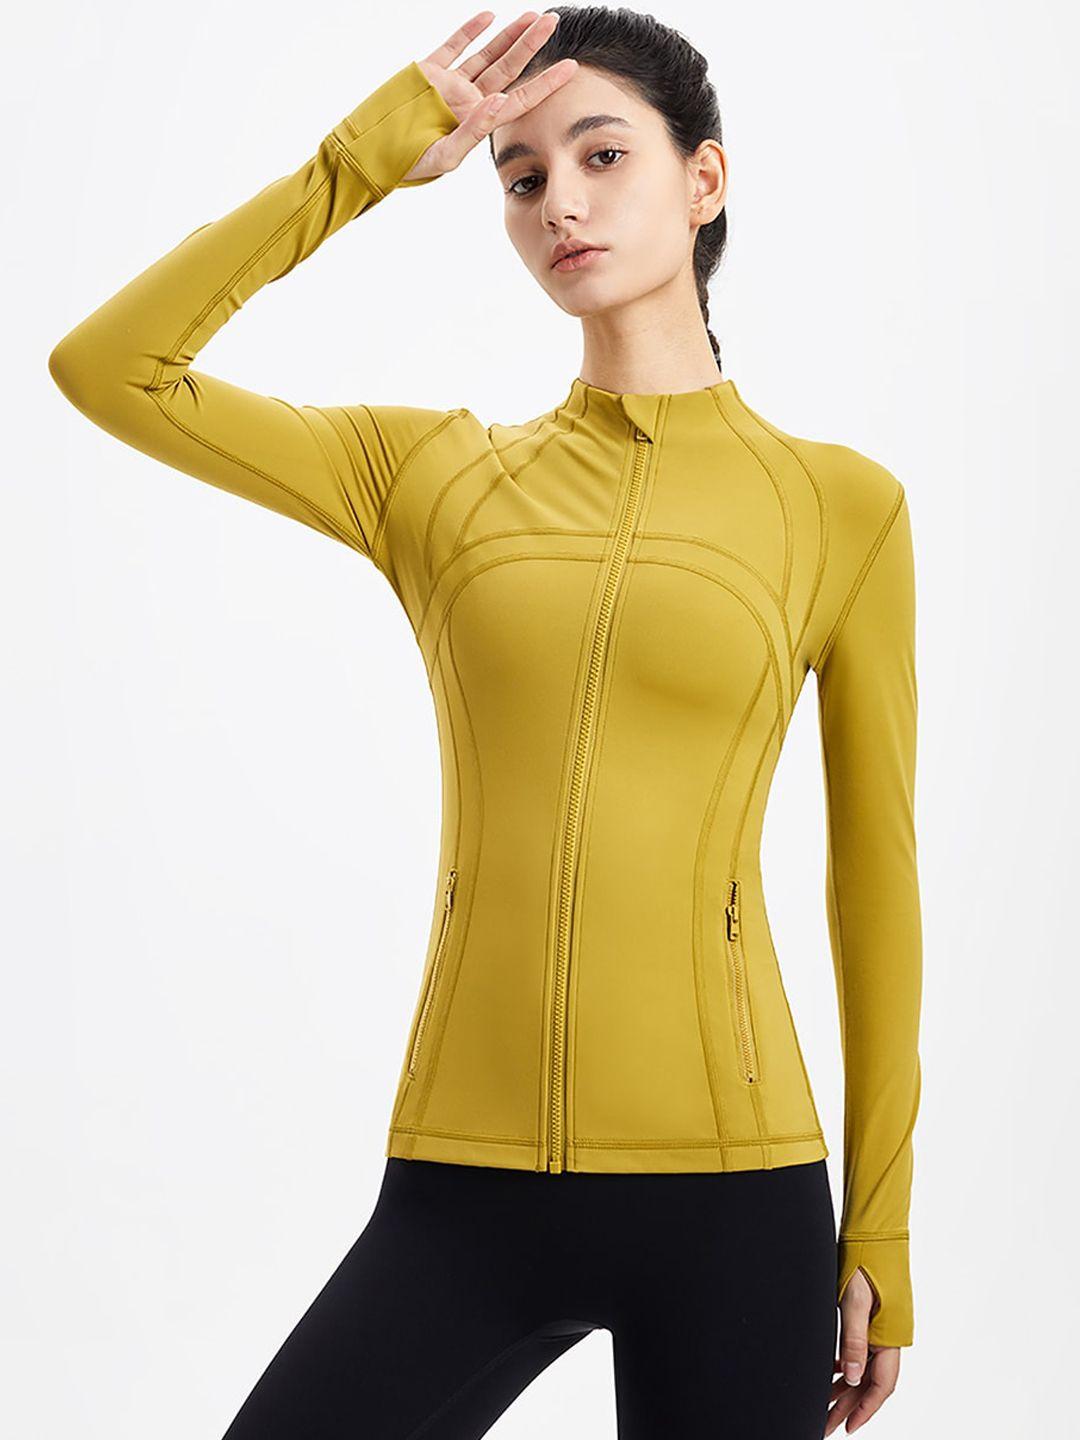 jc collection women yellow striped lightweight training or gym sporty jacket